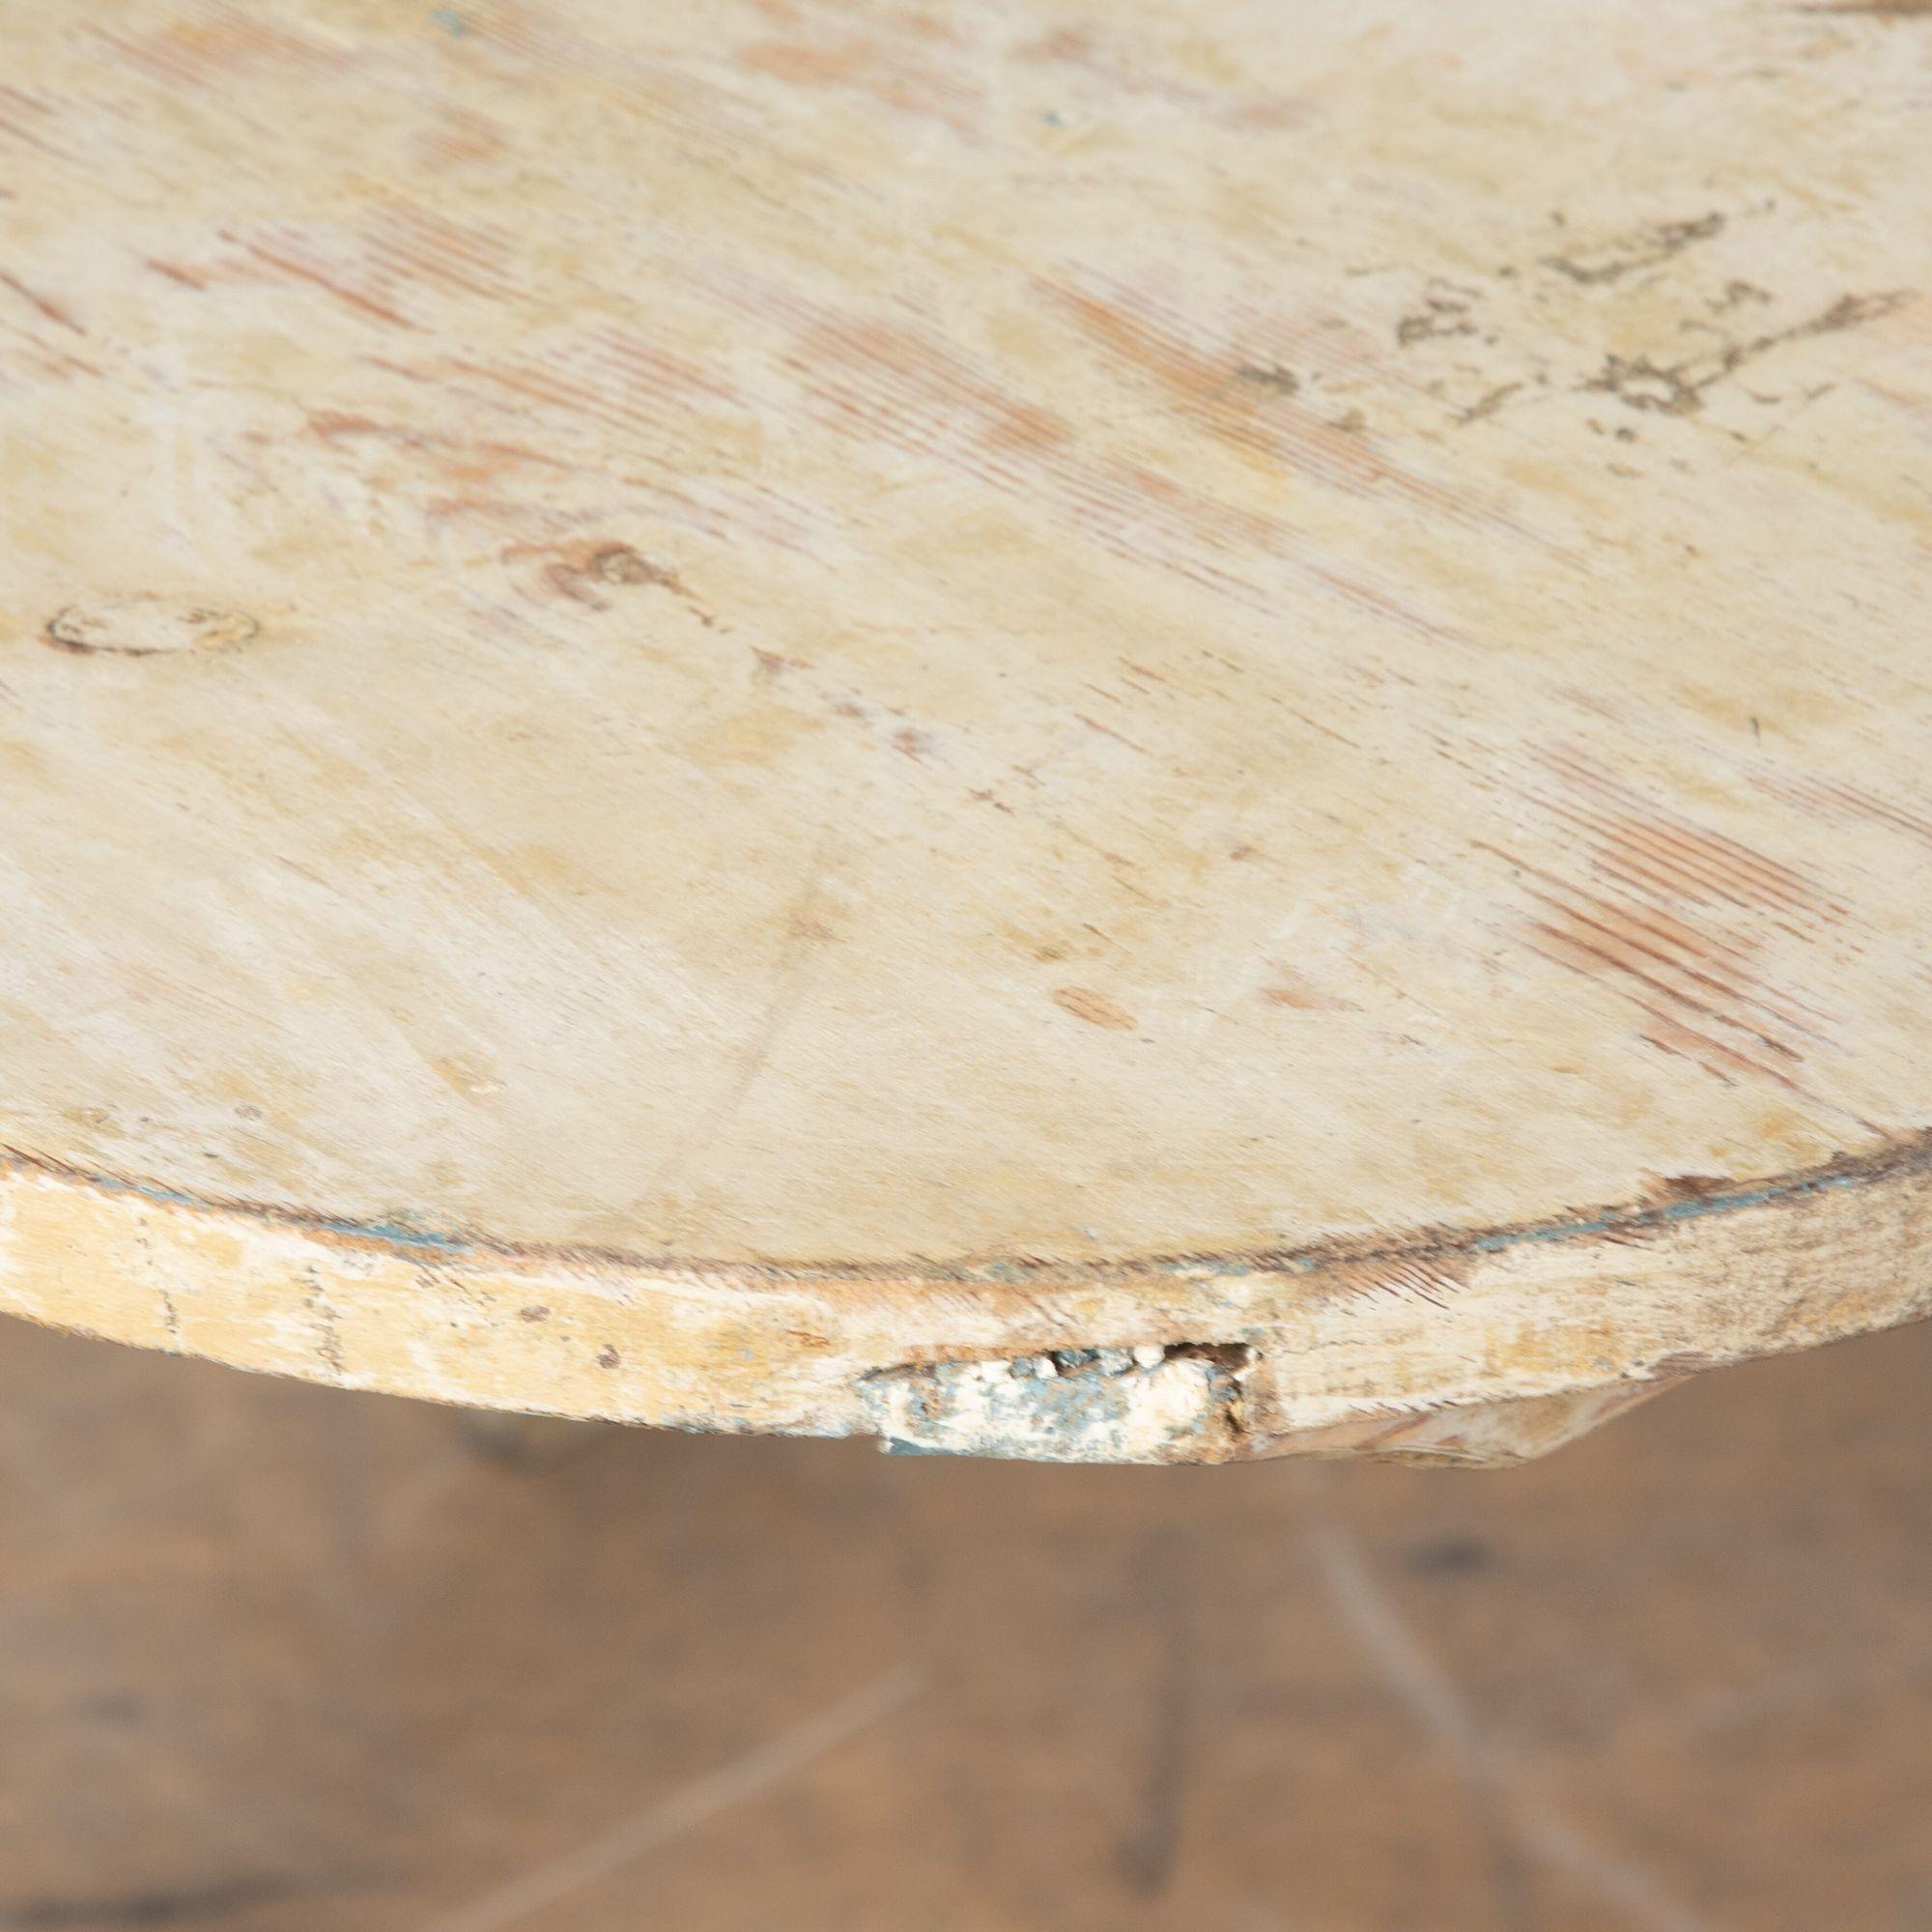 19th century Gustavian drop leaf dining table.
This table has been dry scraped to the original paintwork. 
circa 1870.